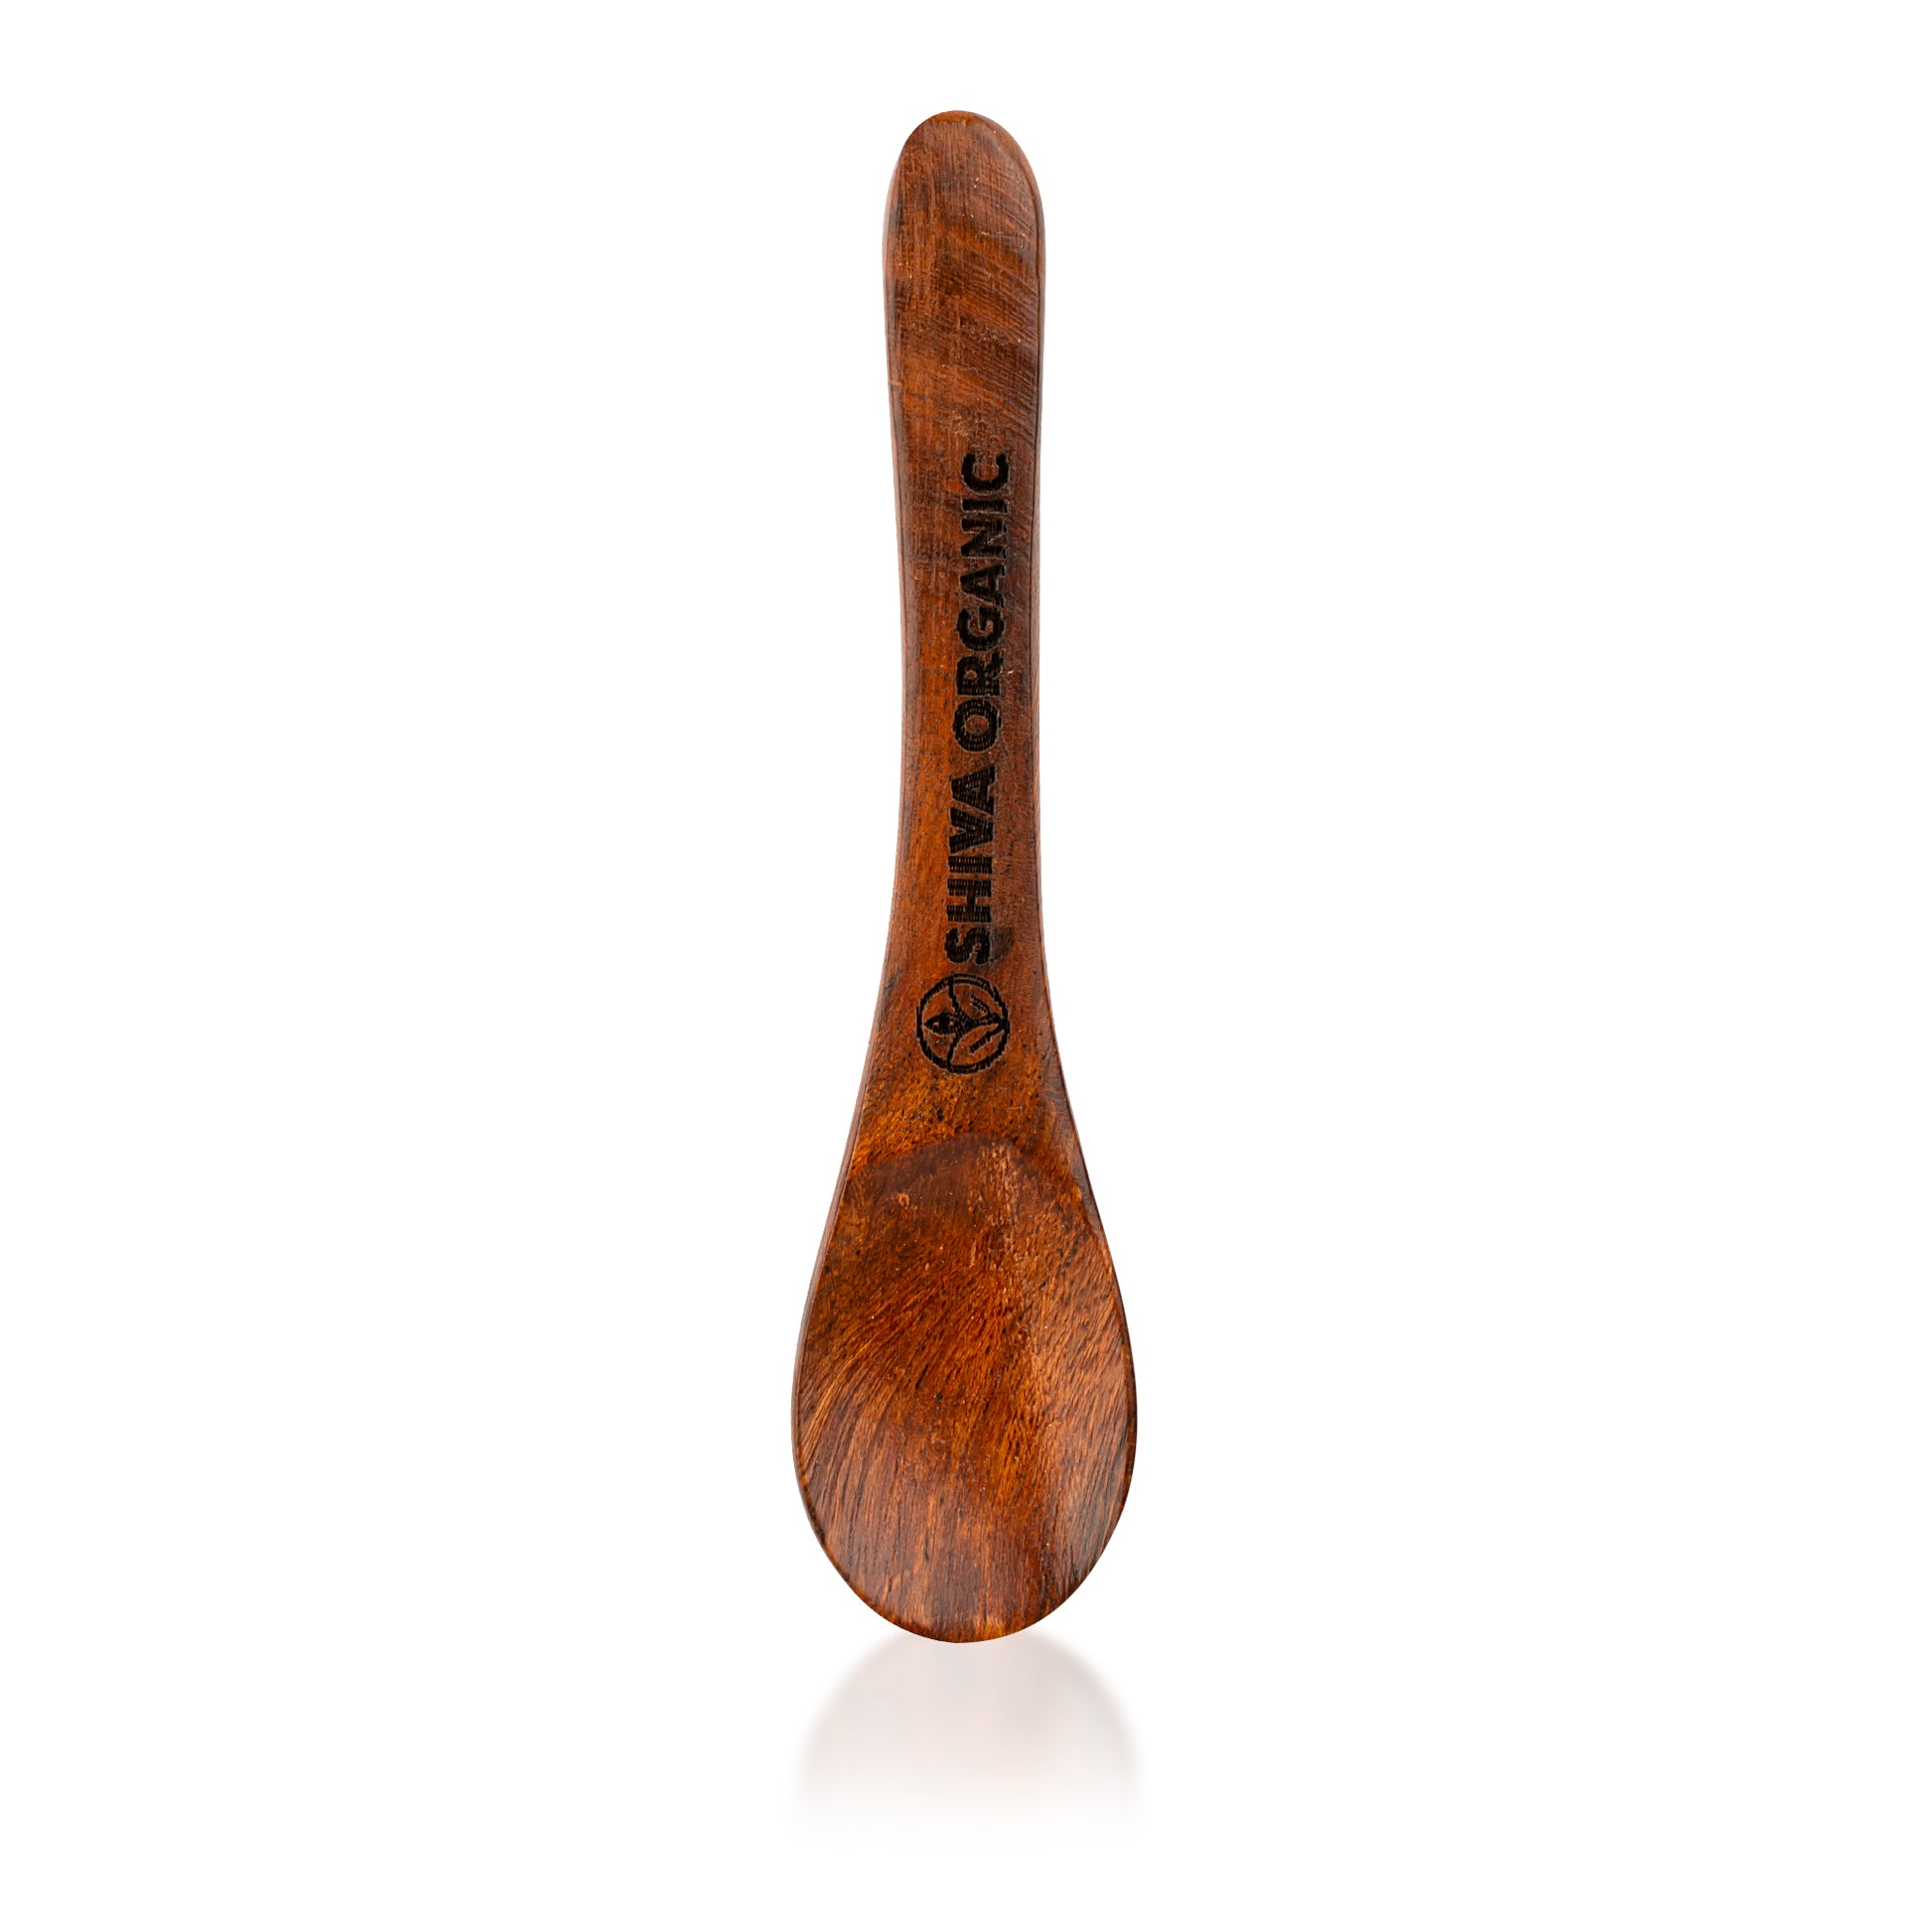 Handmade wooden spoon for spices